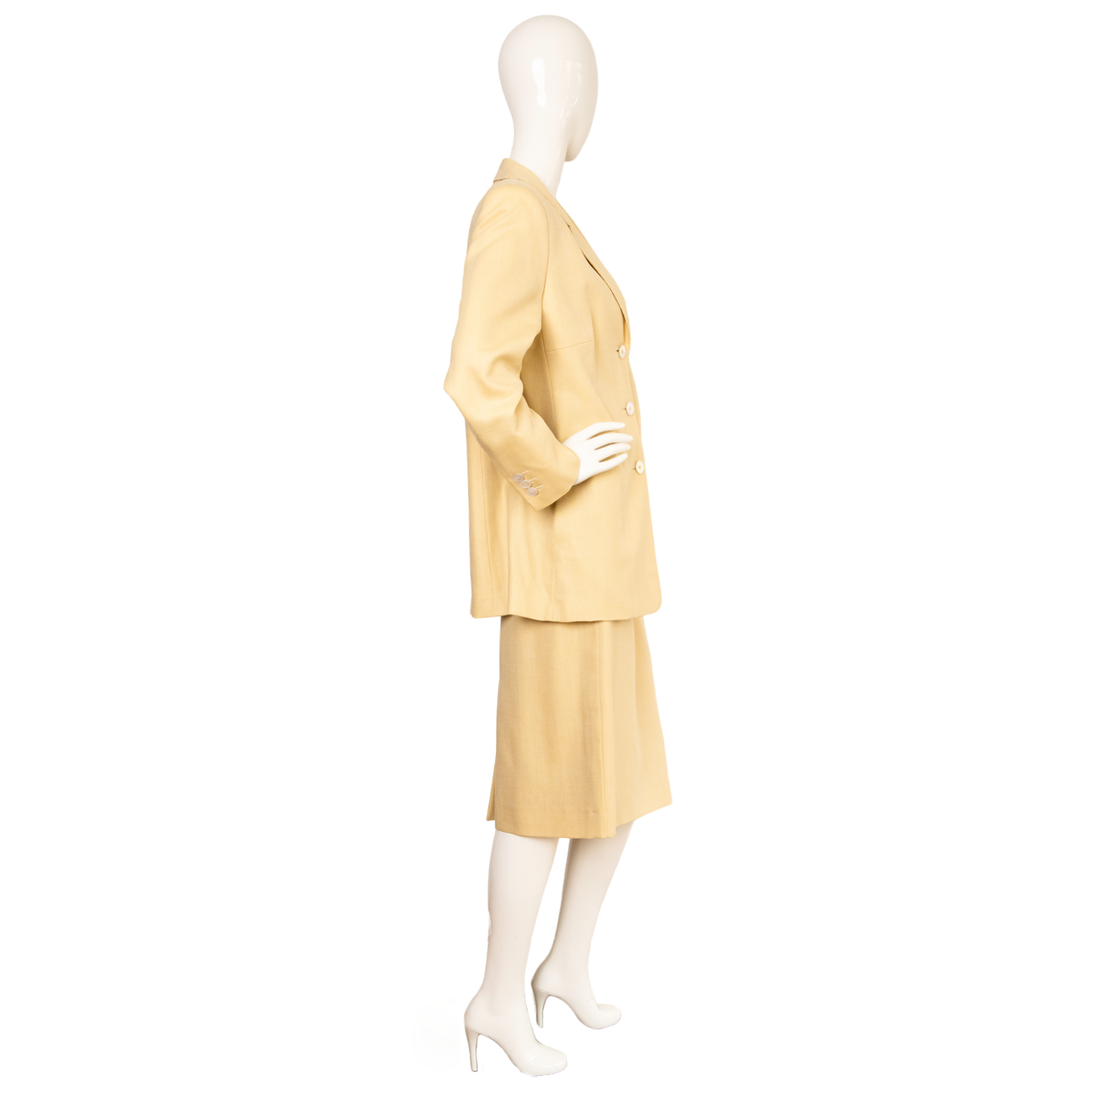 Roberto Quaglia trouser suit with matching skirt